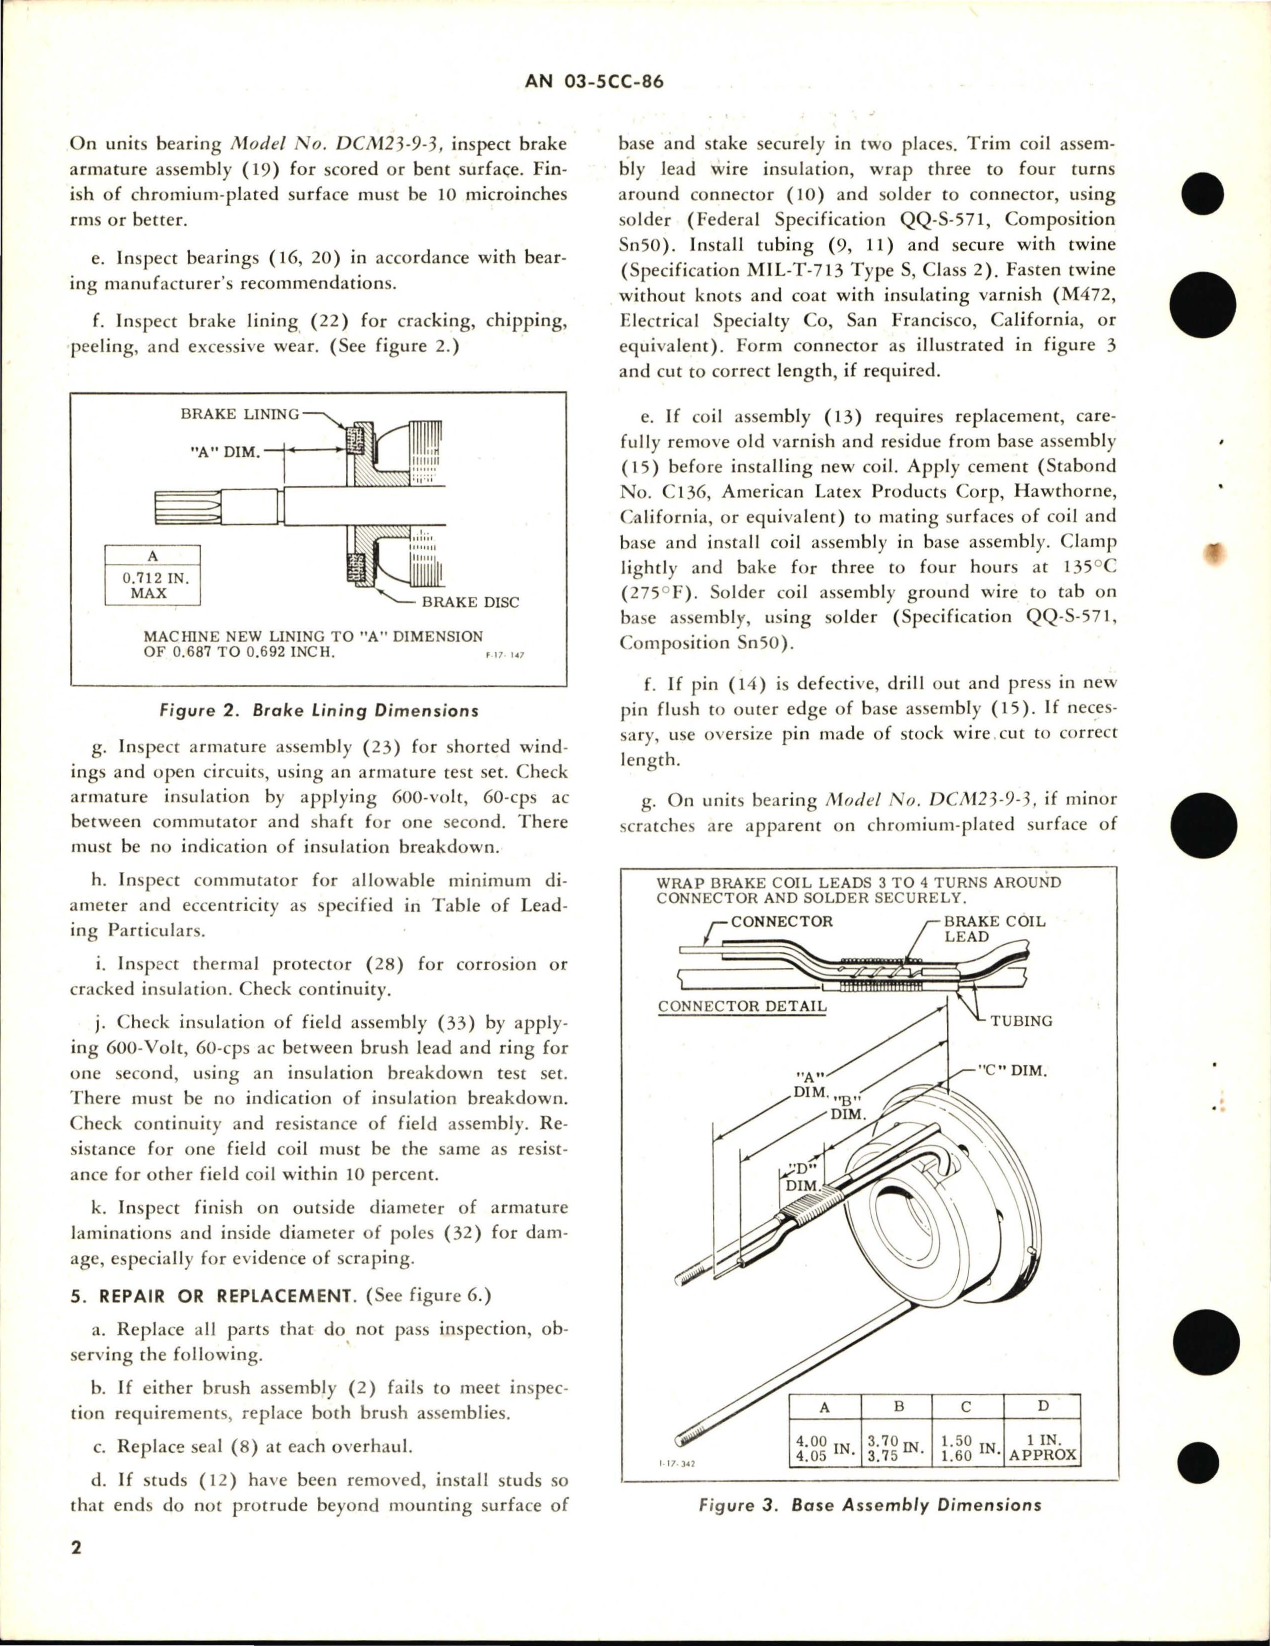 Sample page 2 from AirCorps Library document: Overhaul Instructions with Parts Breakdown for Motor, Direct Current Part 32370-2